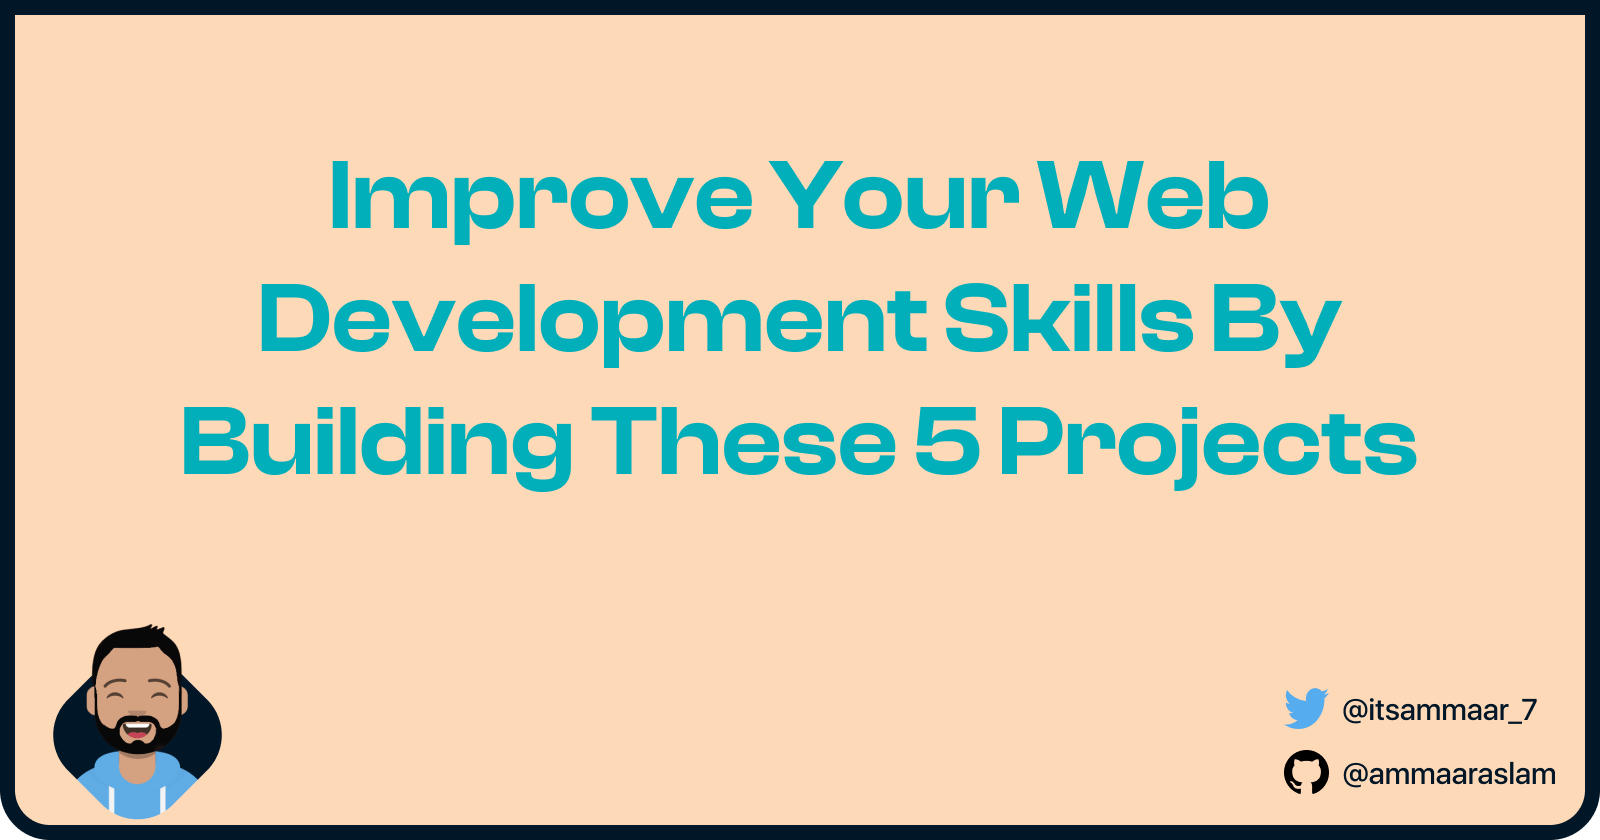 Improve Your Web Development Skills By Building These 5 Projects